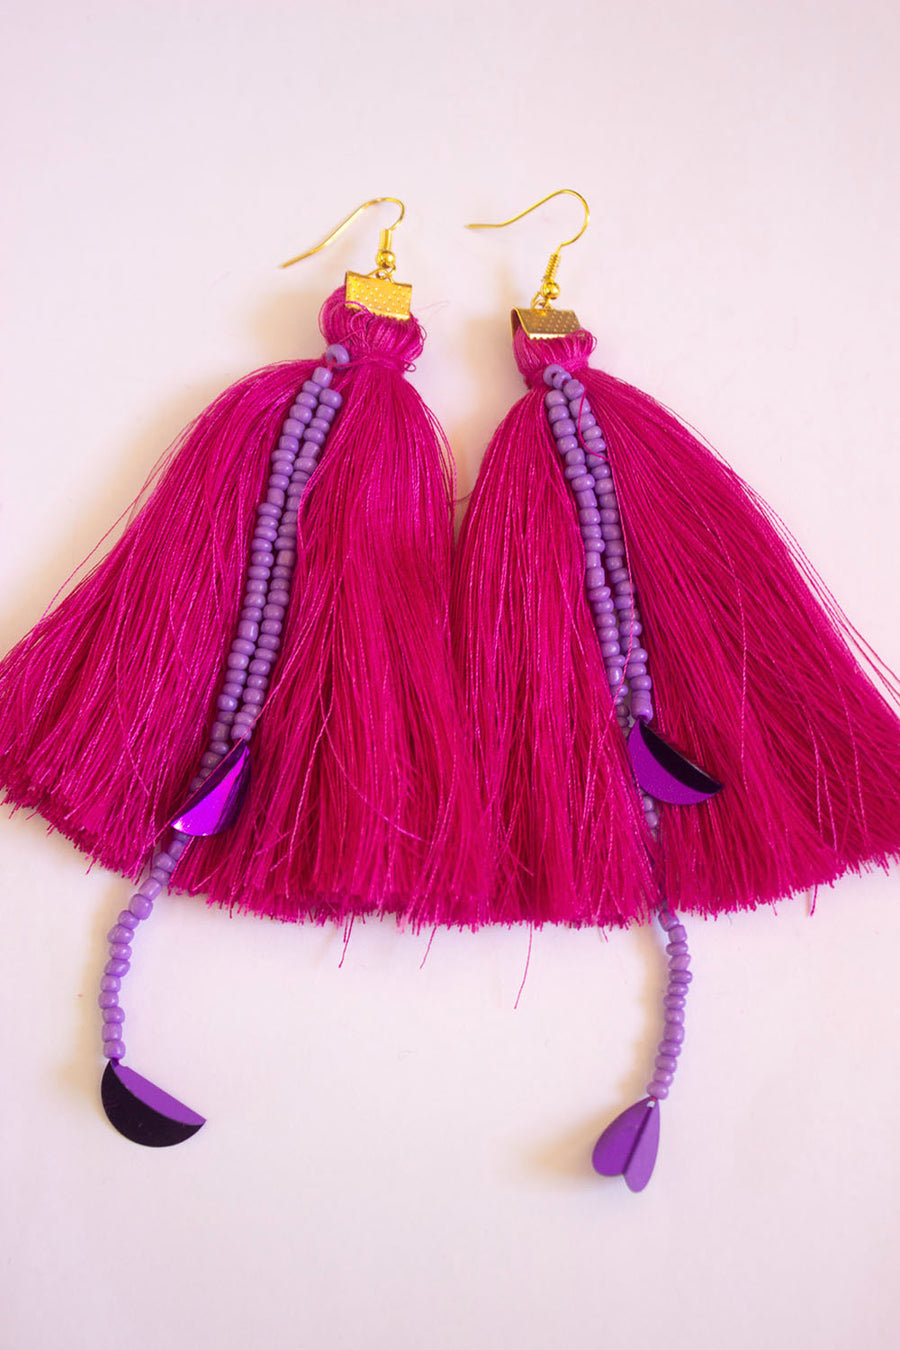 PINK AND PURPLE EARRING